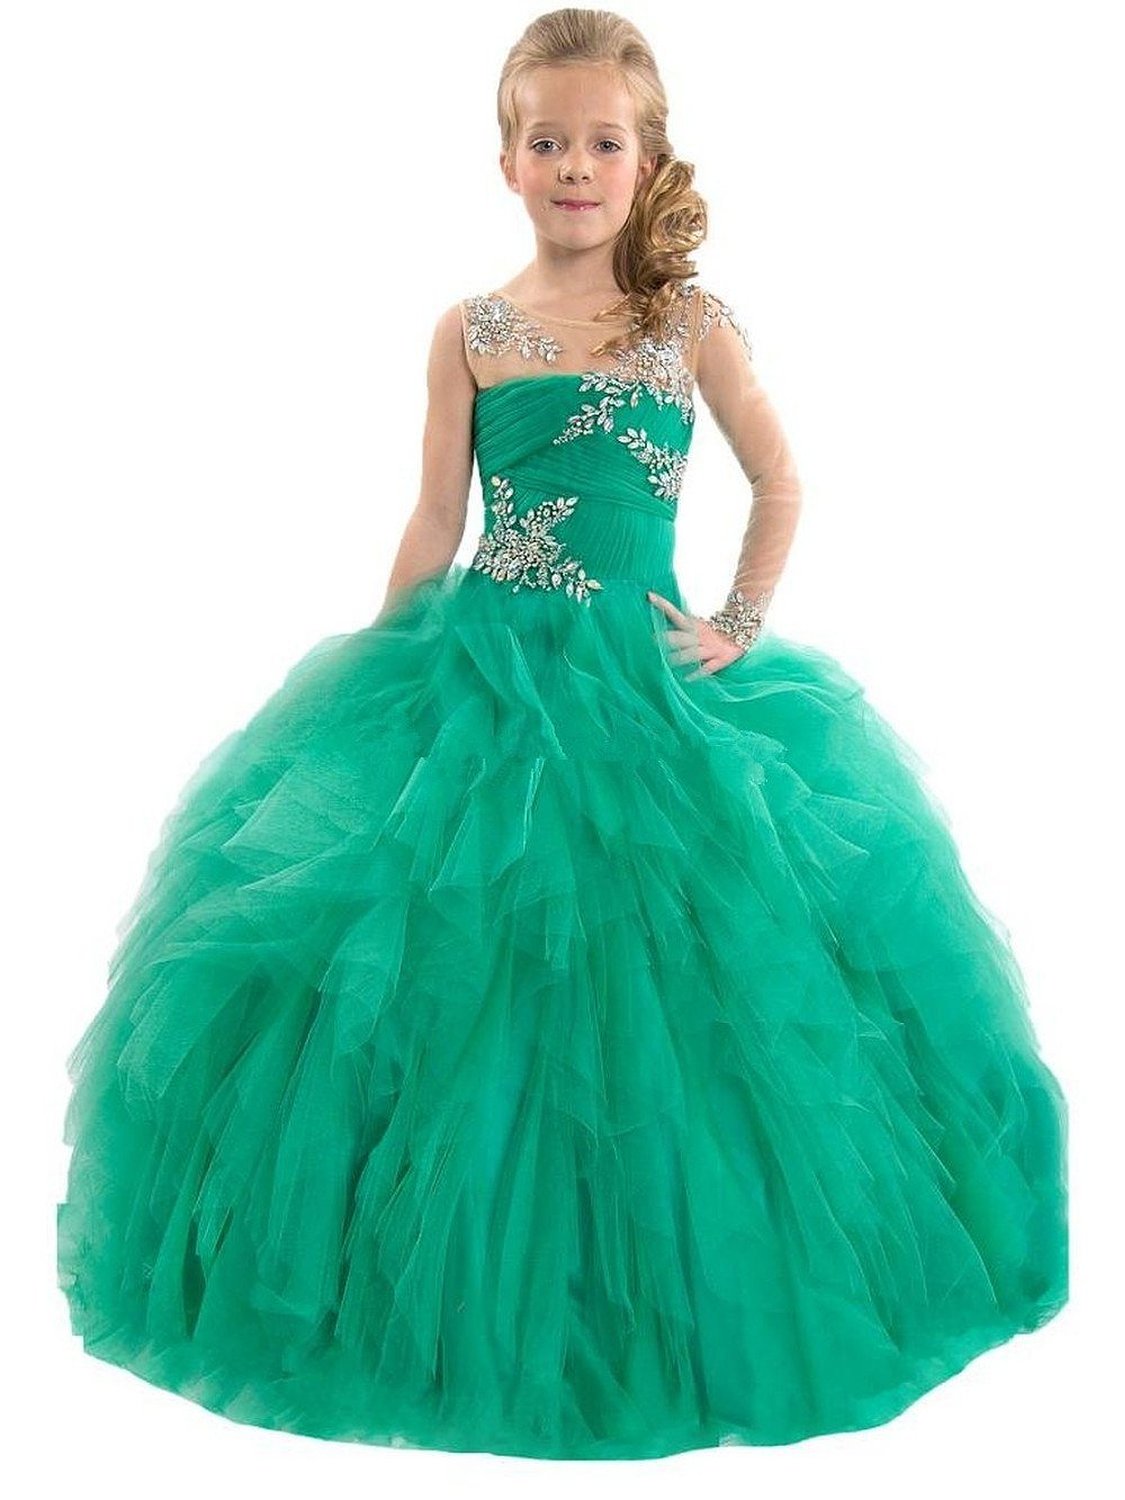 Beaded Girls Pageant Ball Gowns Long Dance Prom Party Dress Flower Girl Dresses